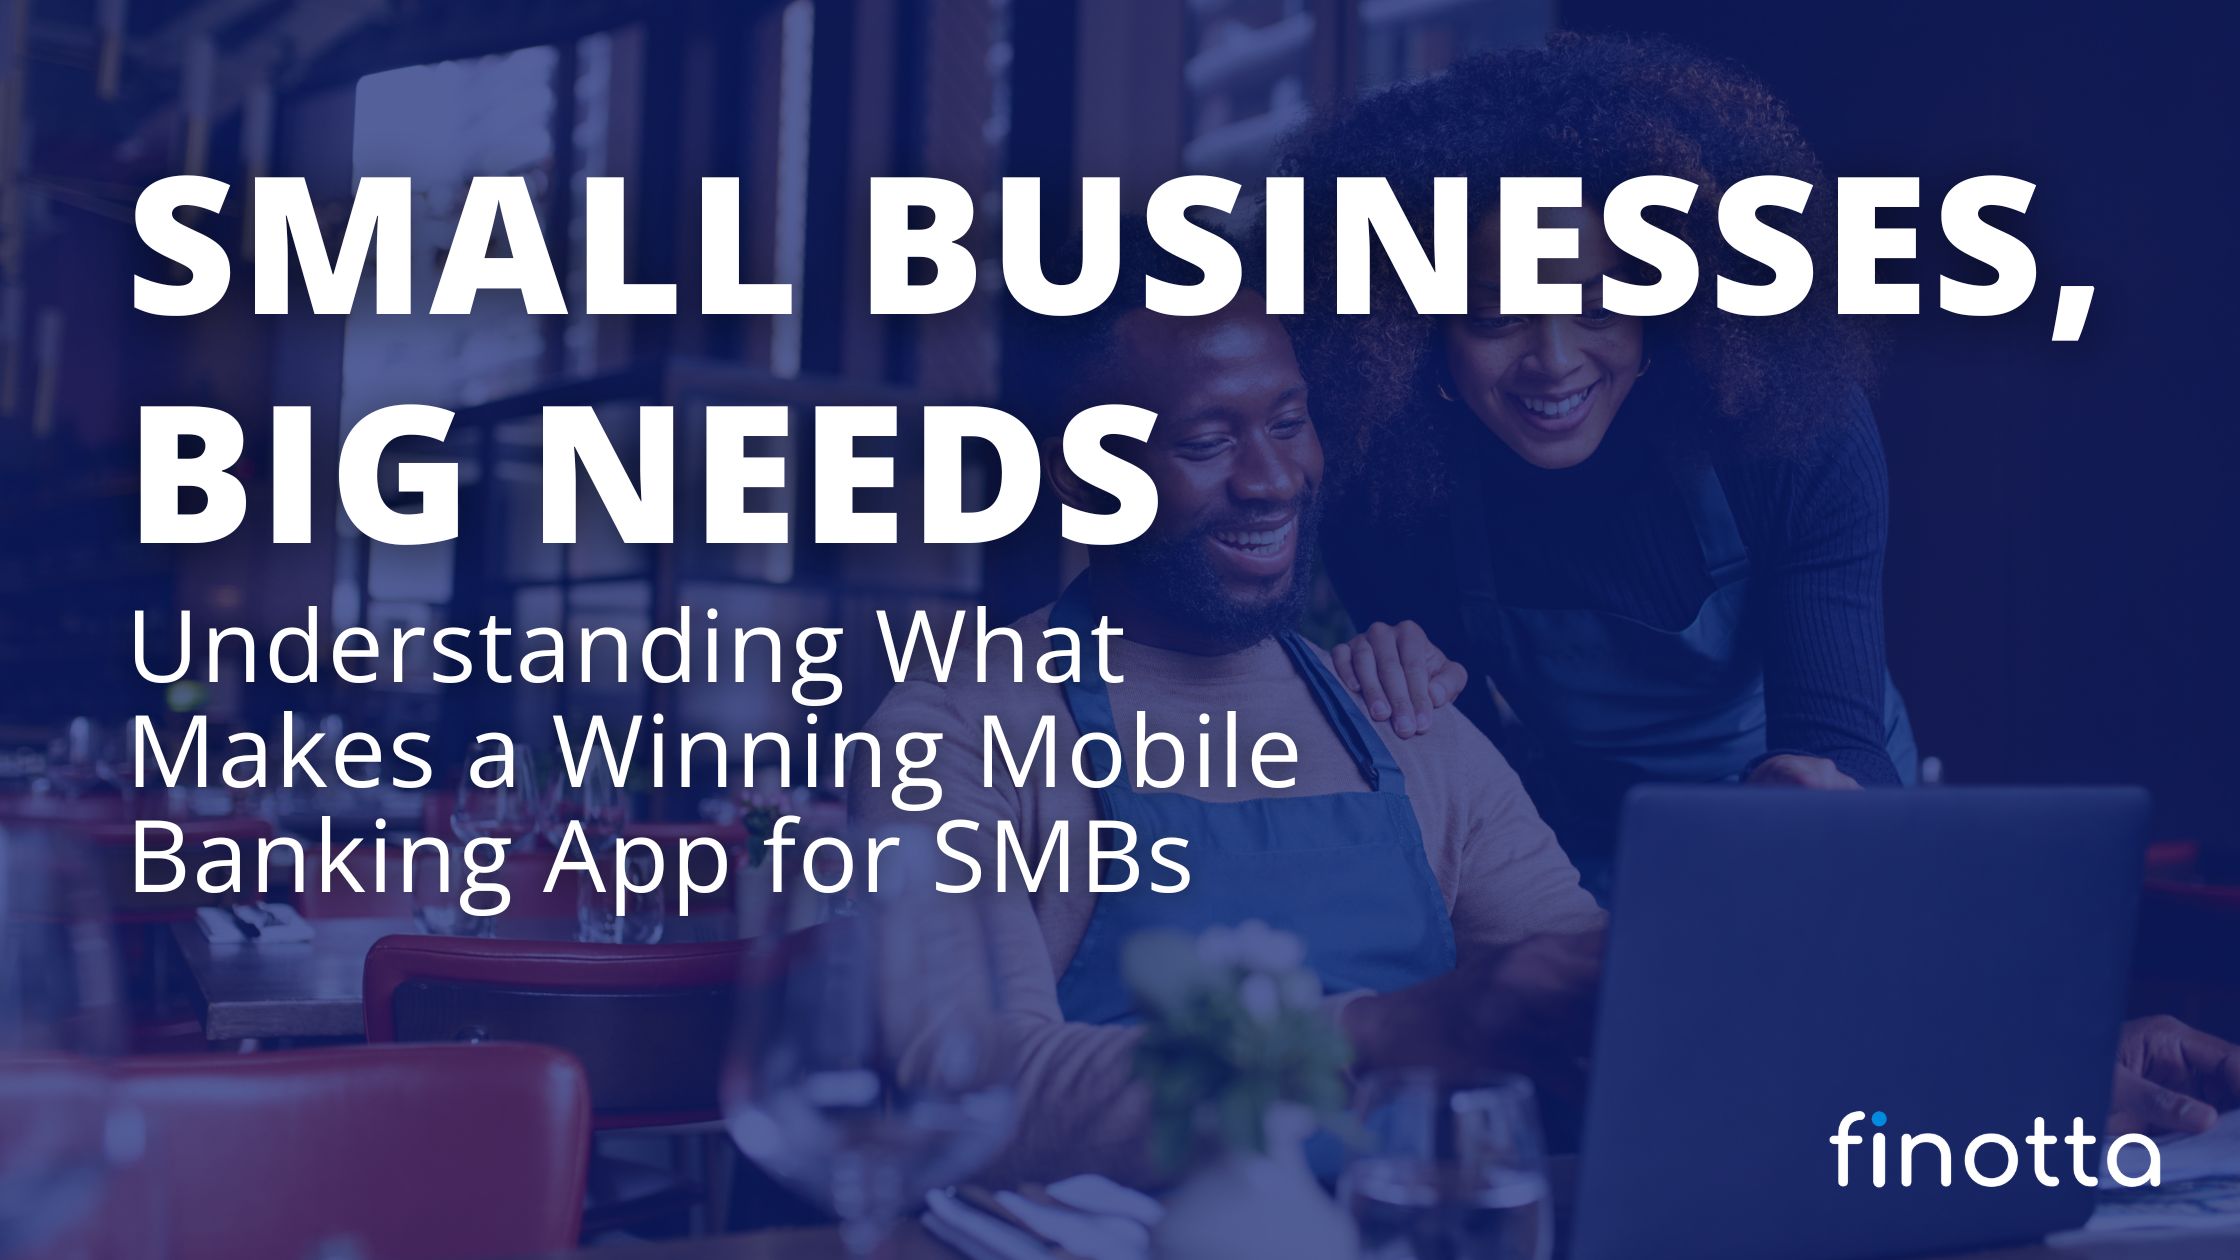 Small Businesses, Big Needs: Understanding What Makes a Winning Mobile Banking Apps for SMBs